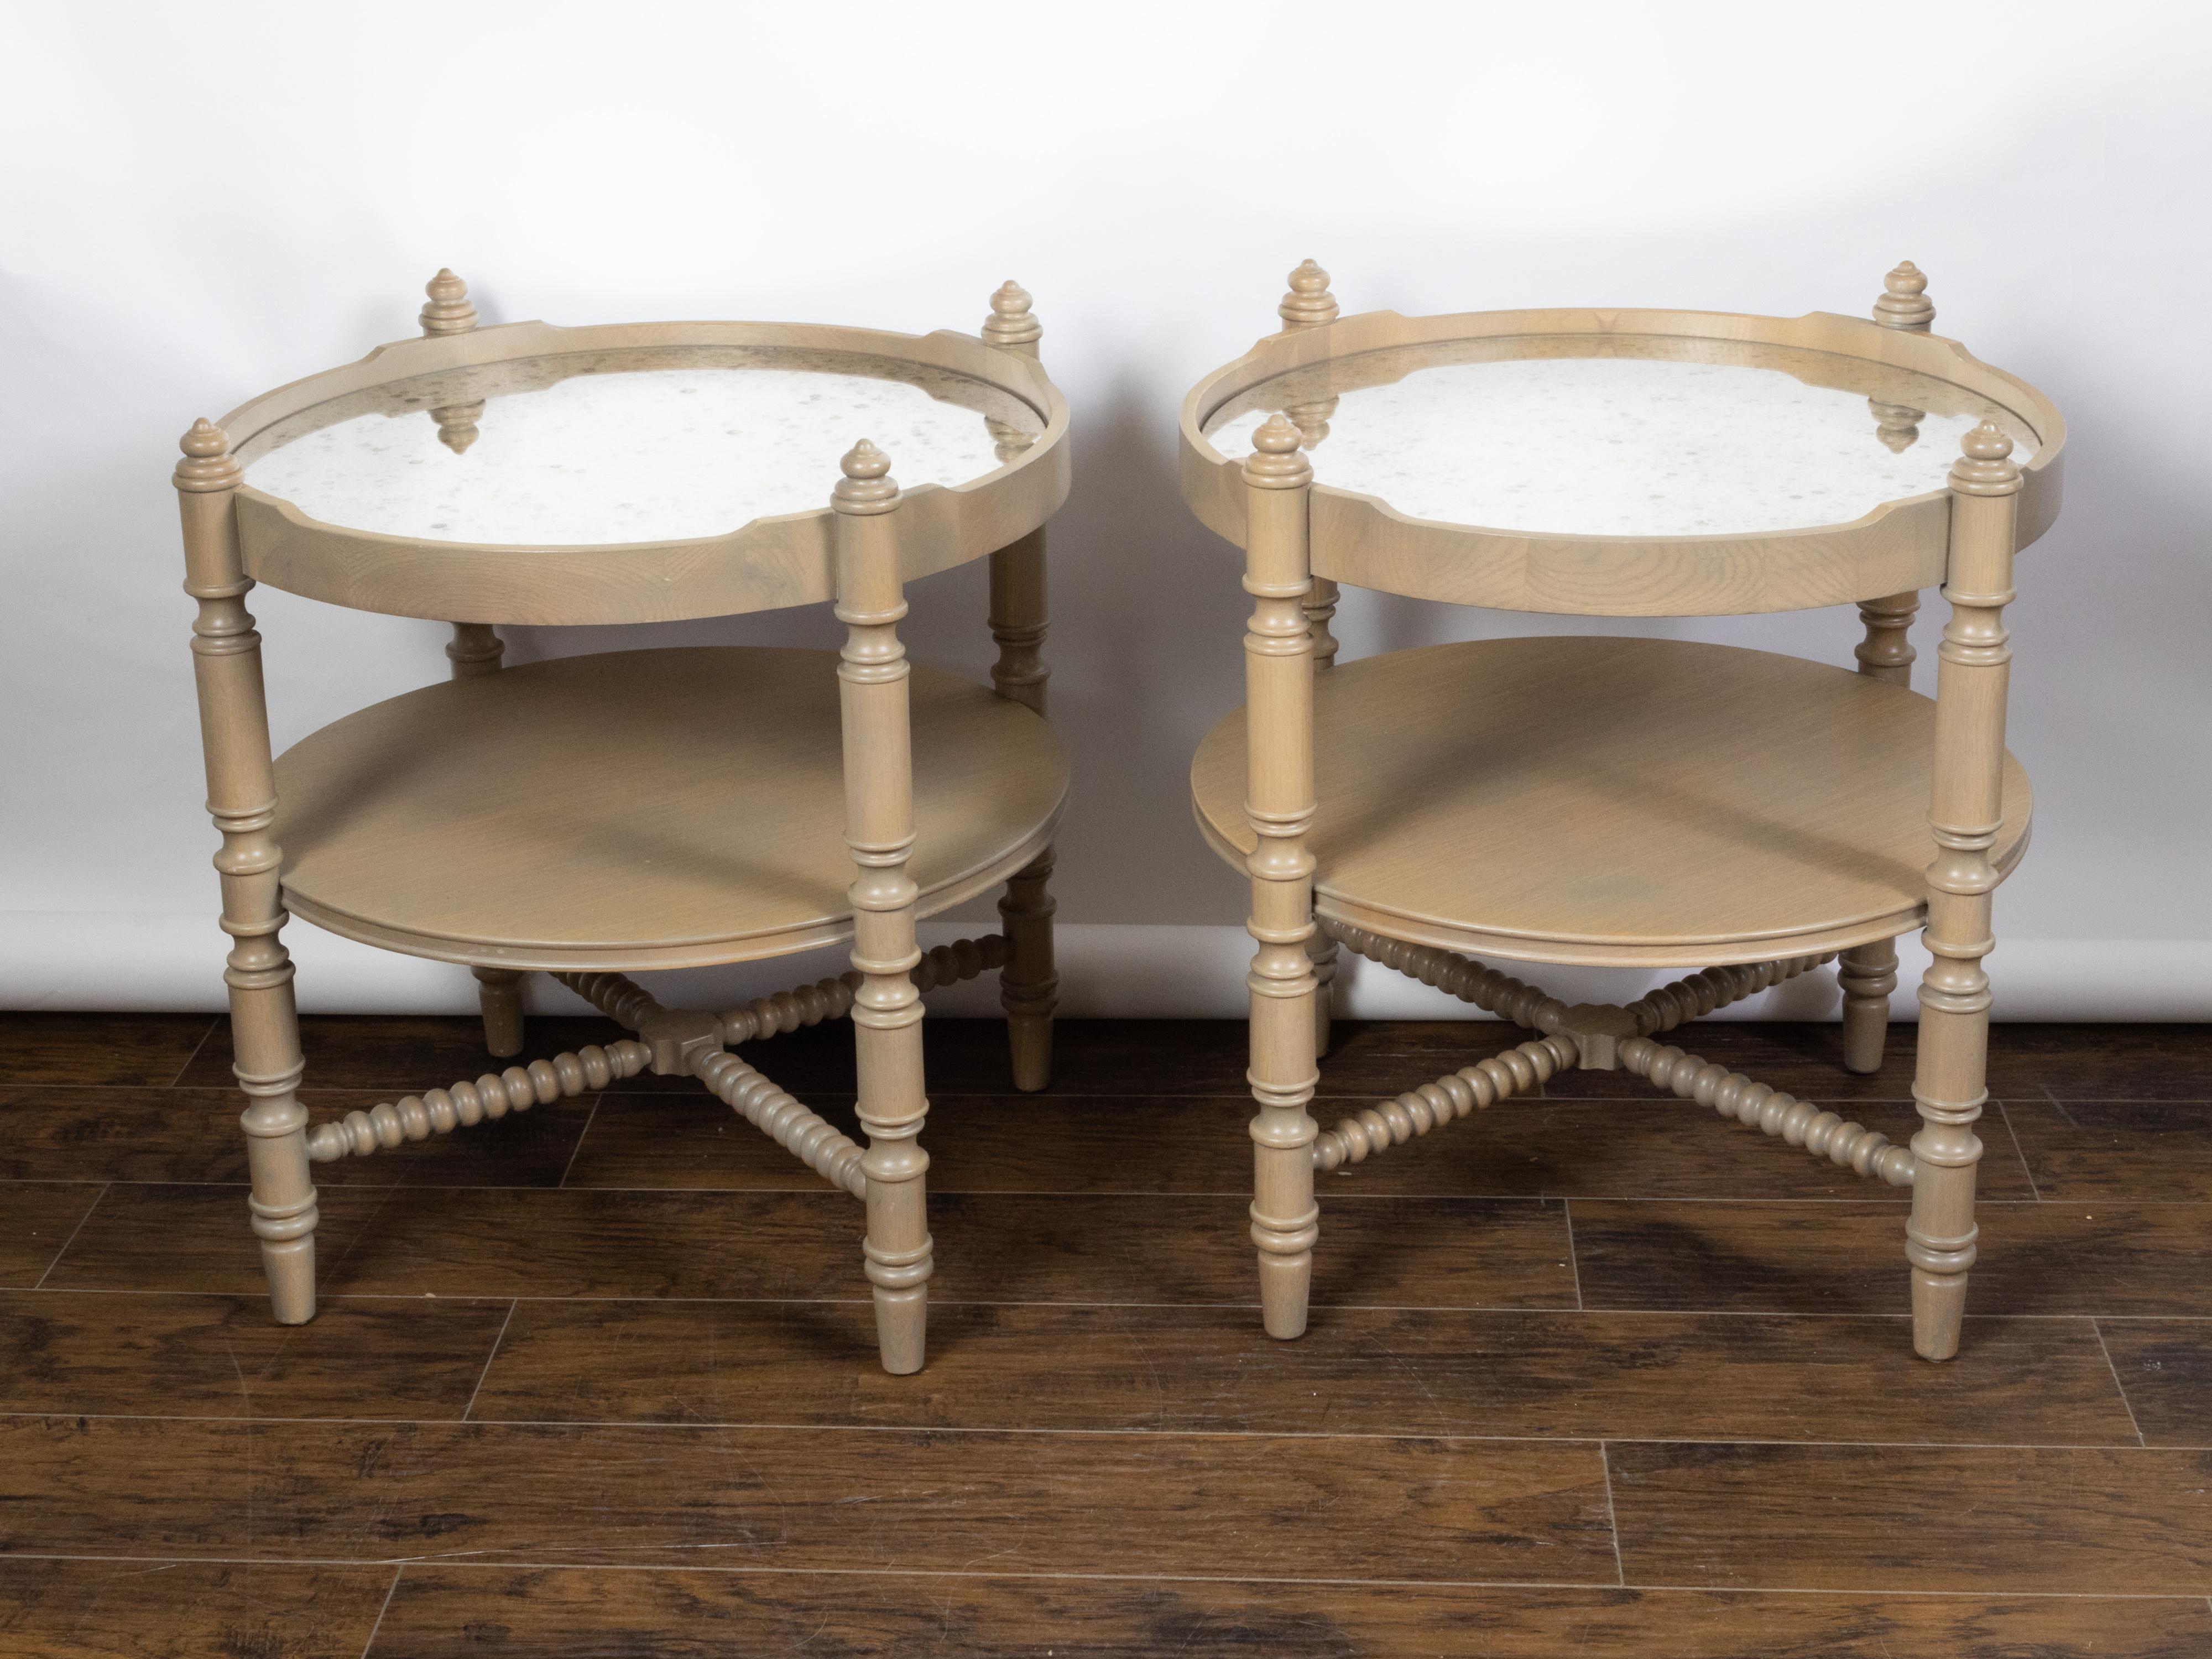 A pair of French vintage oak side tables from the mid 20th century, with mirrored tops and turned legs. Created in France during the second half of the 20th century, each of this pair of side tables features a circular mirrored top secured within